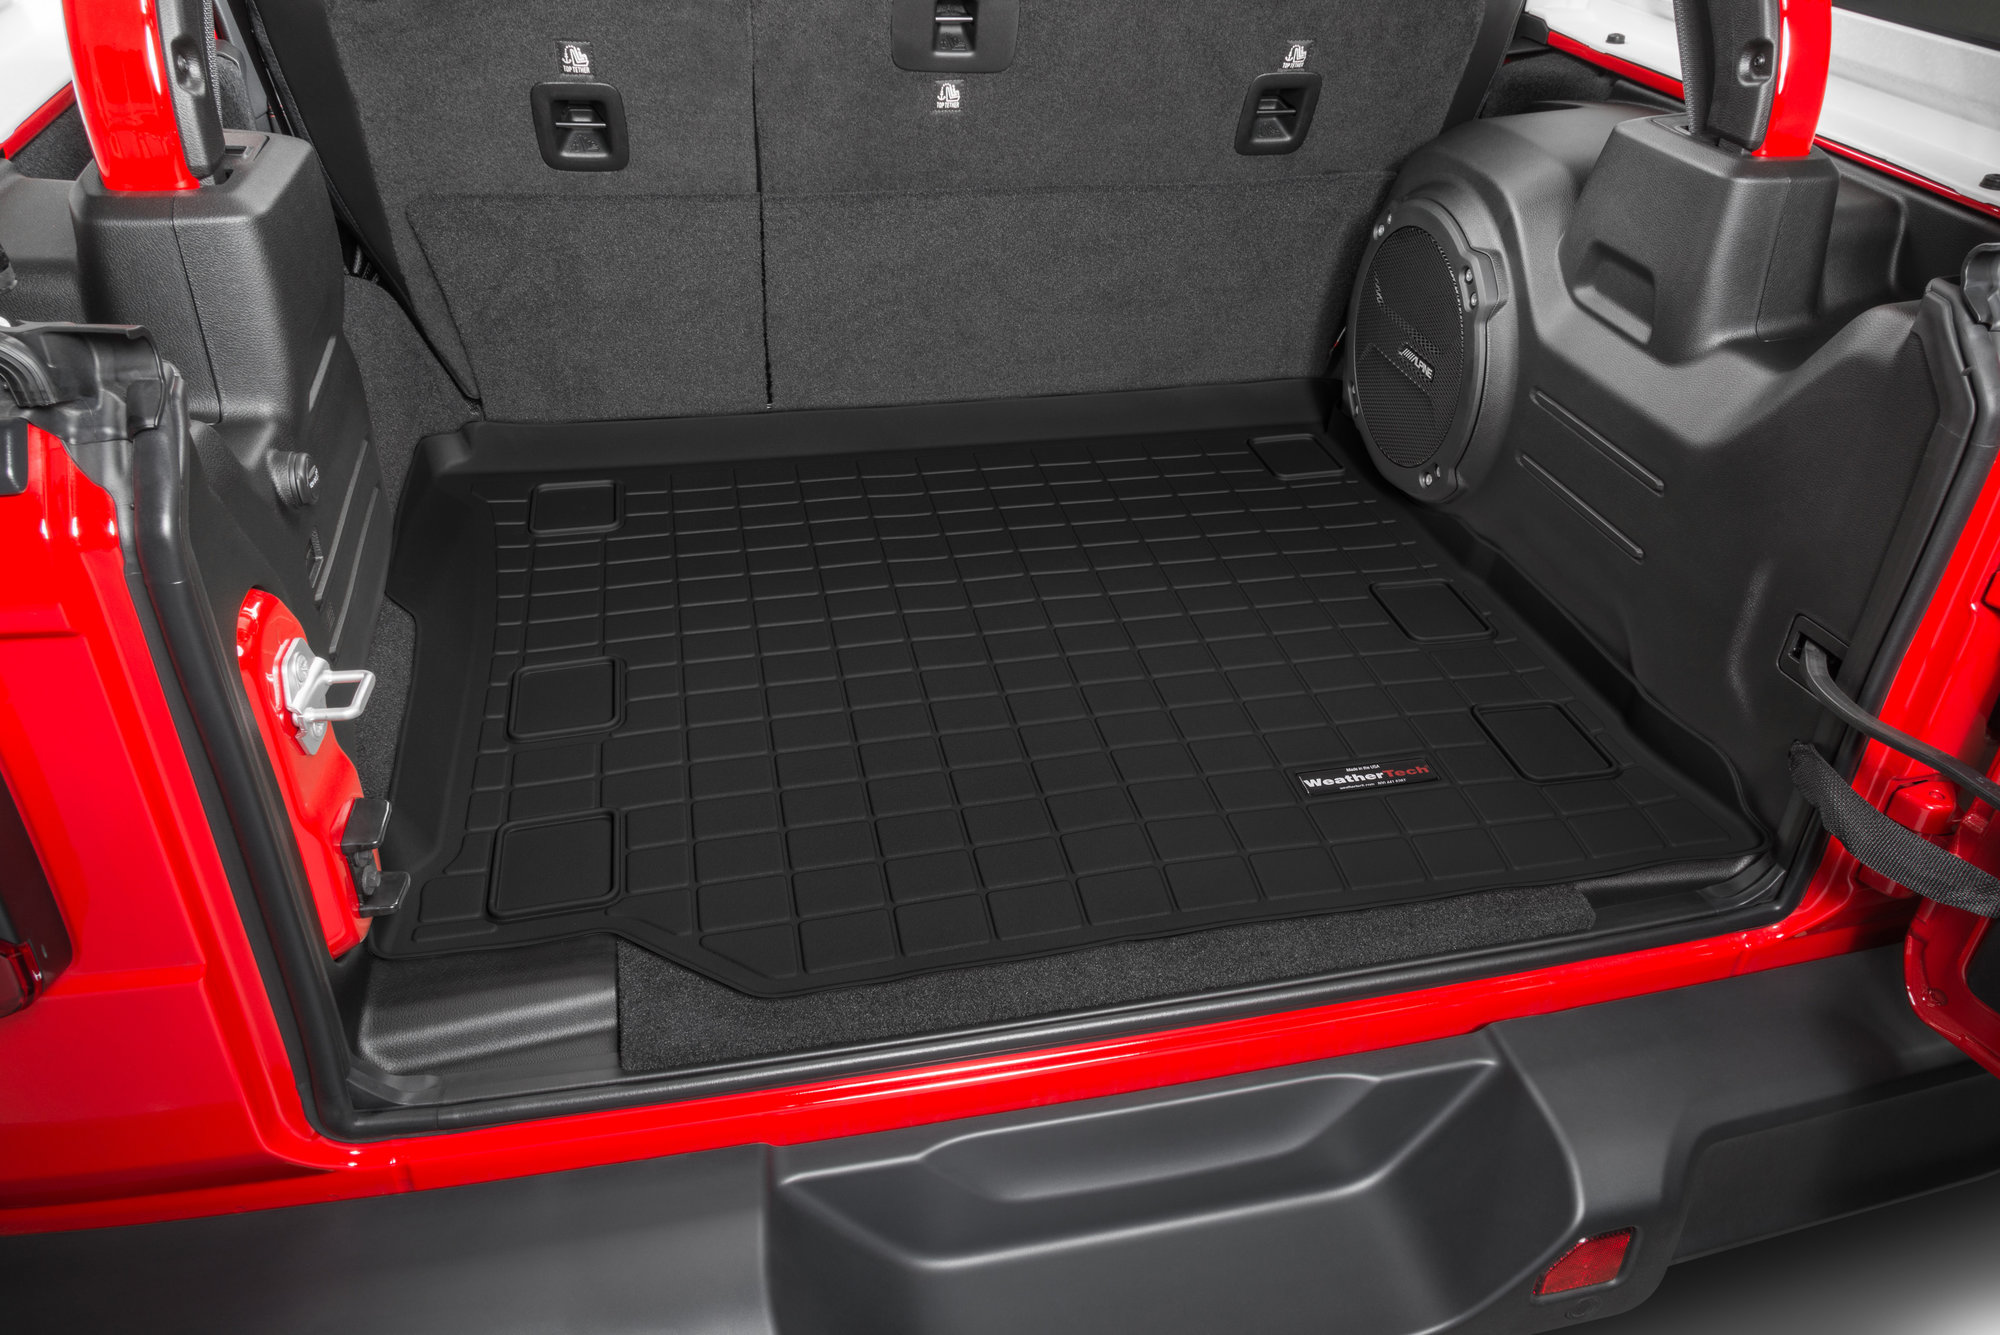 WeatherTech Rear Cargo Liner in Black for 18-22 Jeep Wrangler JL Unlimited  with Cloth Seats | Quadratec